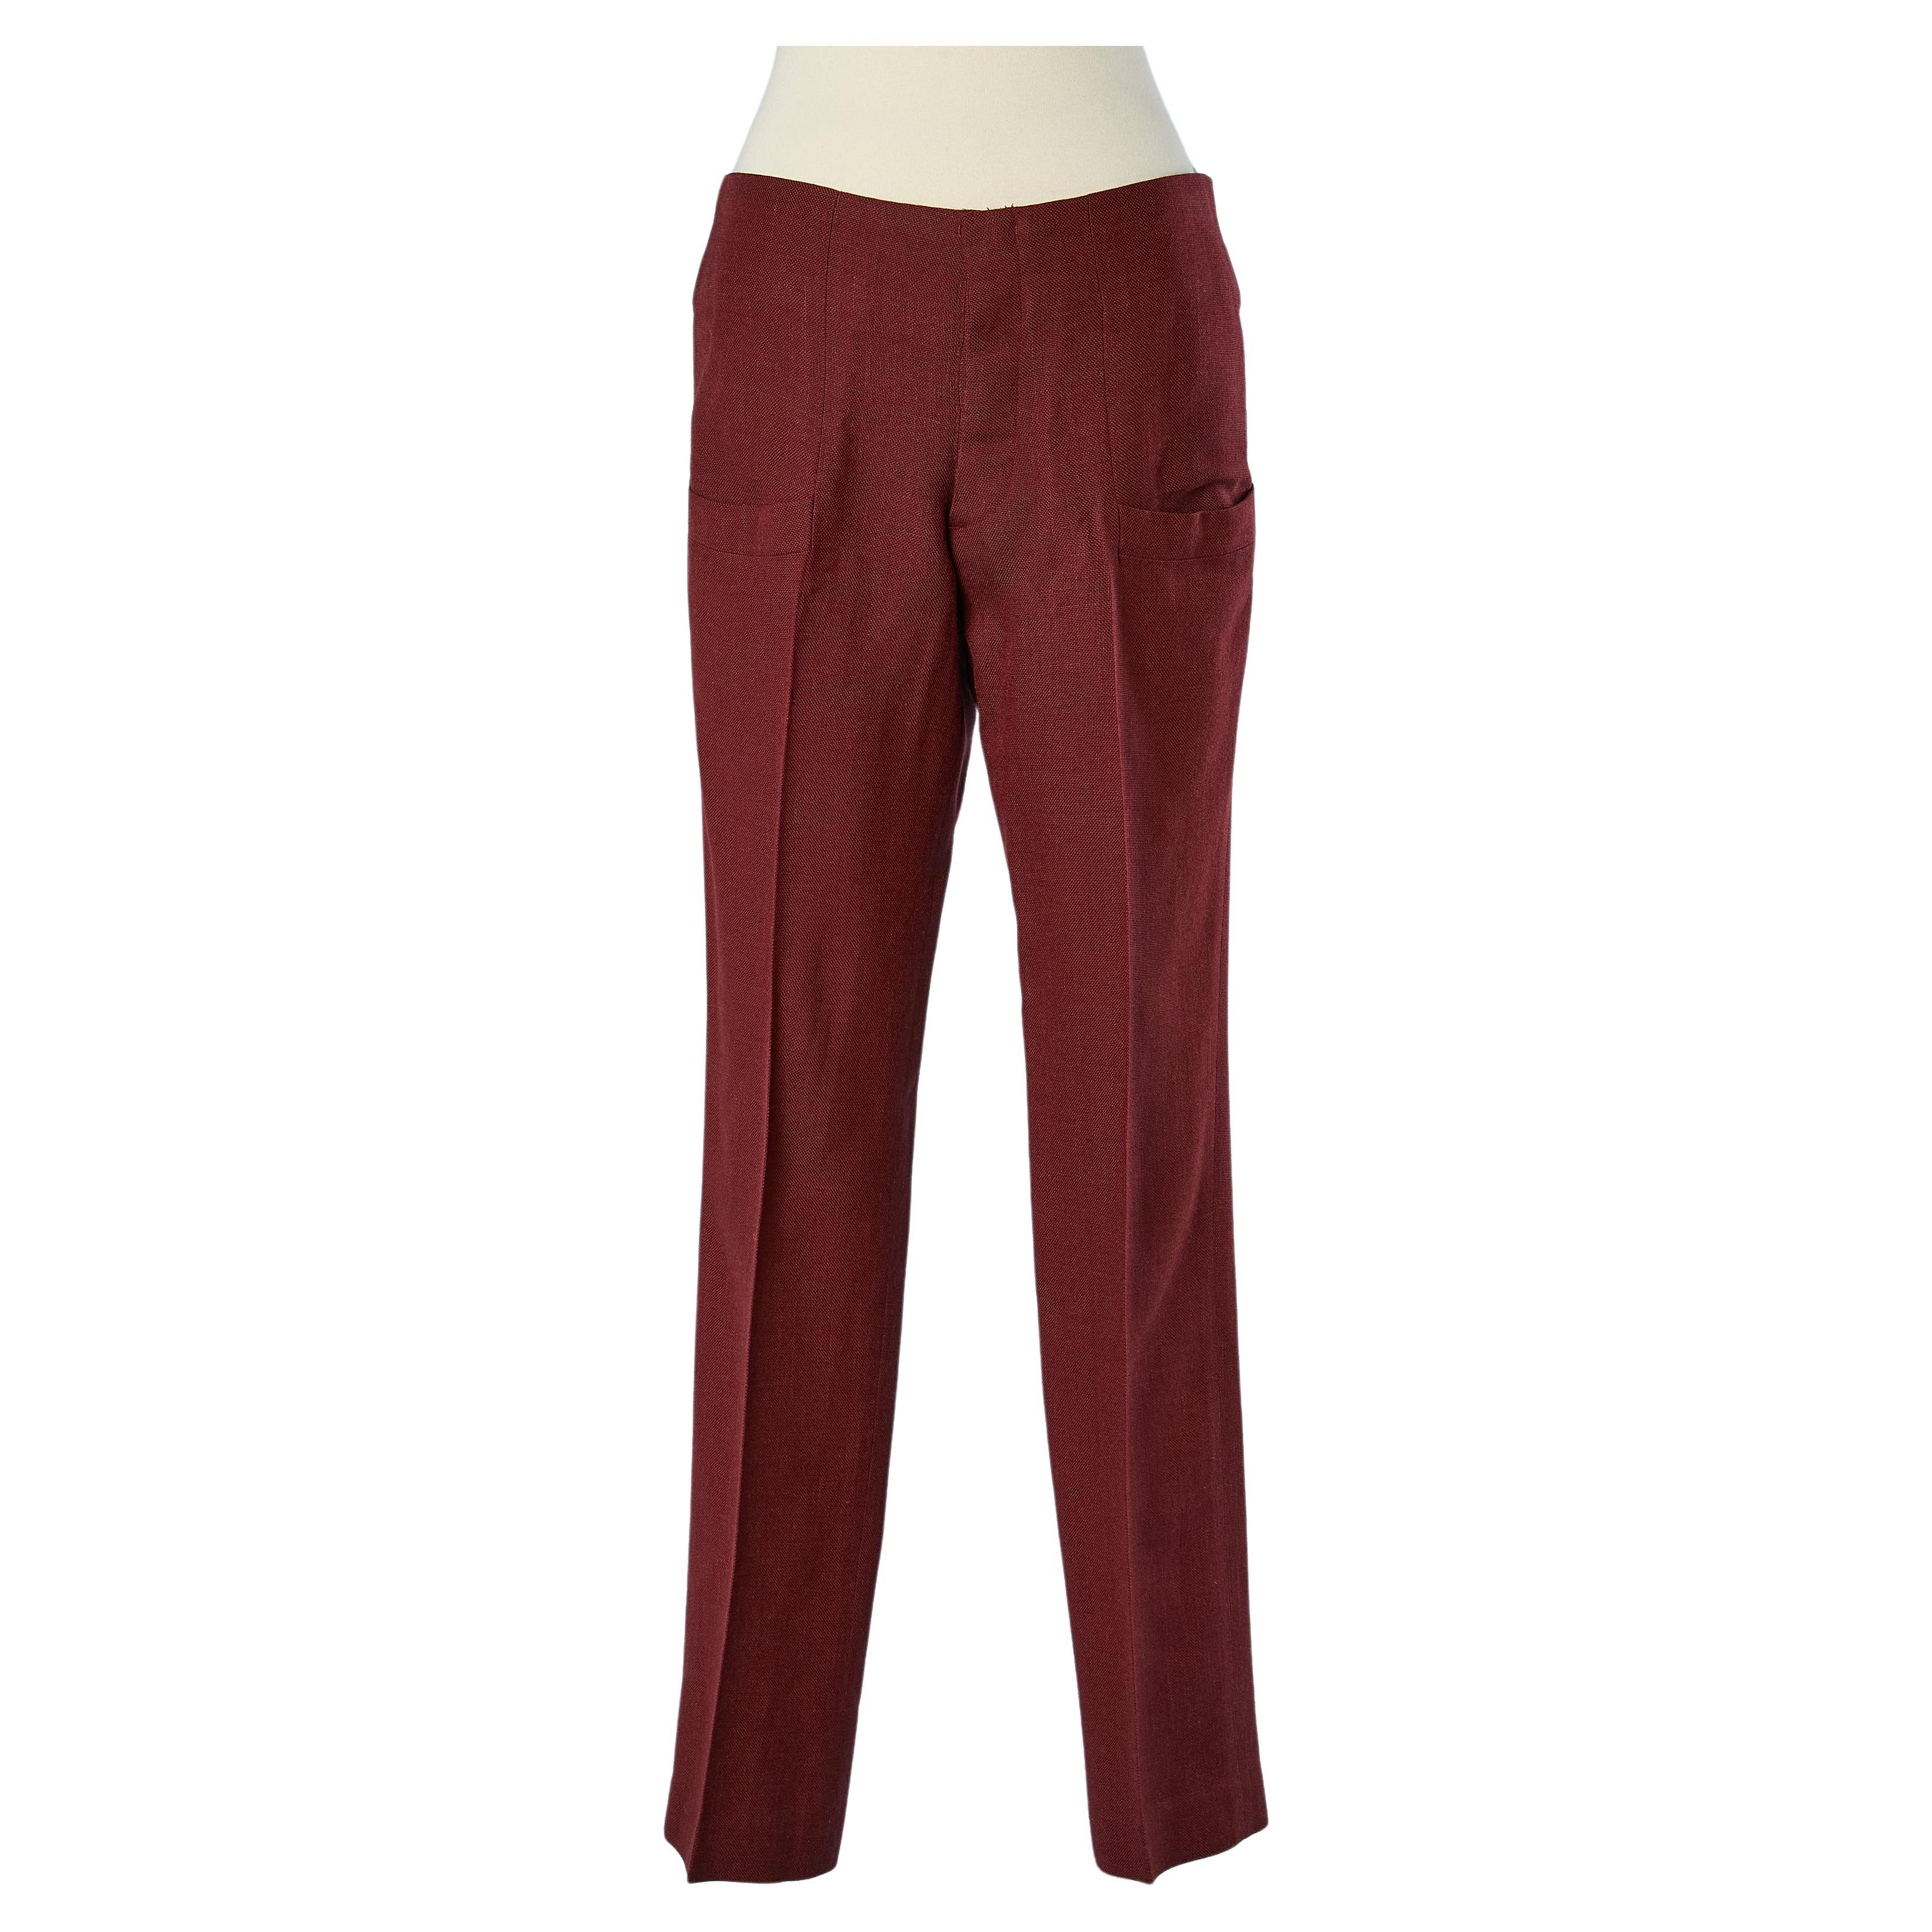 Burgundy linen and acrylic high-waisted trouser Pierre Cardin  For Sale